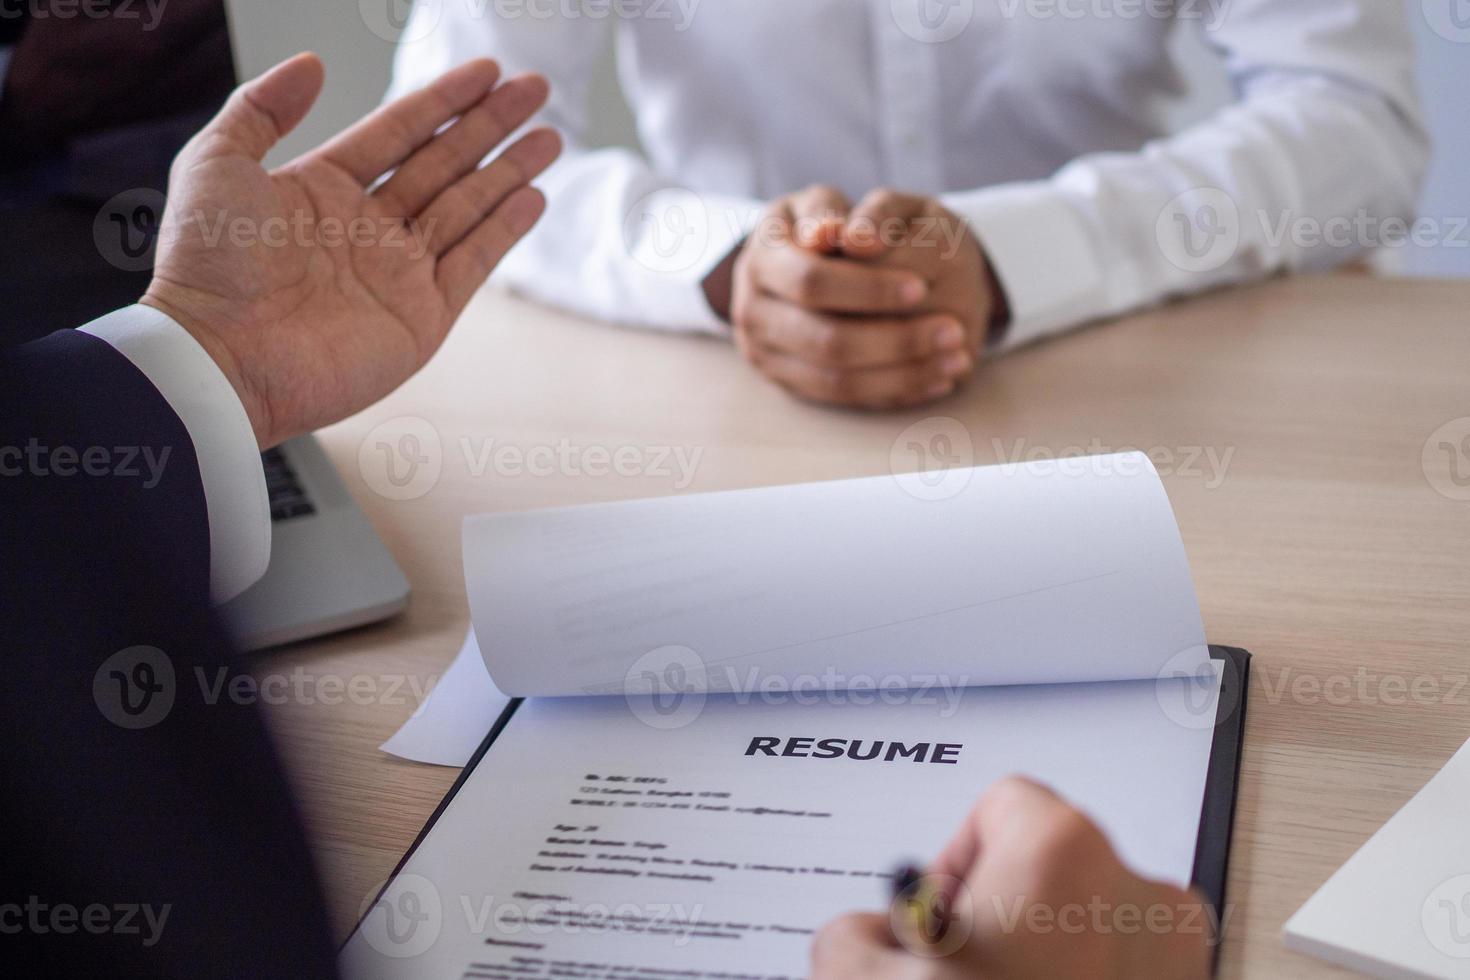 The manager is interview applicants or candidates and read resume. The manager inquires about work experience and discusses the attitude towards the company. New Employees Concepts photo